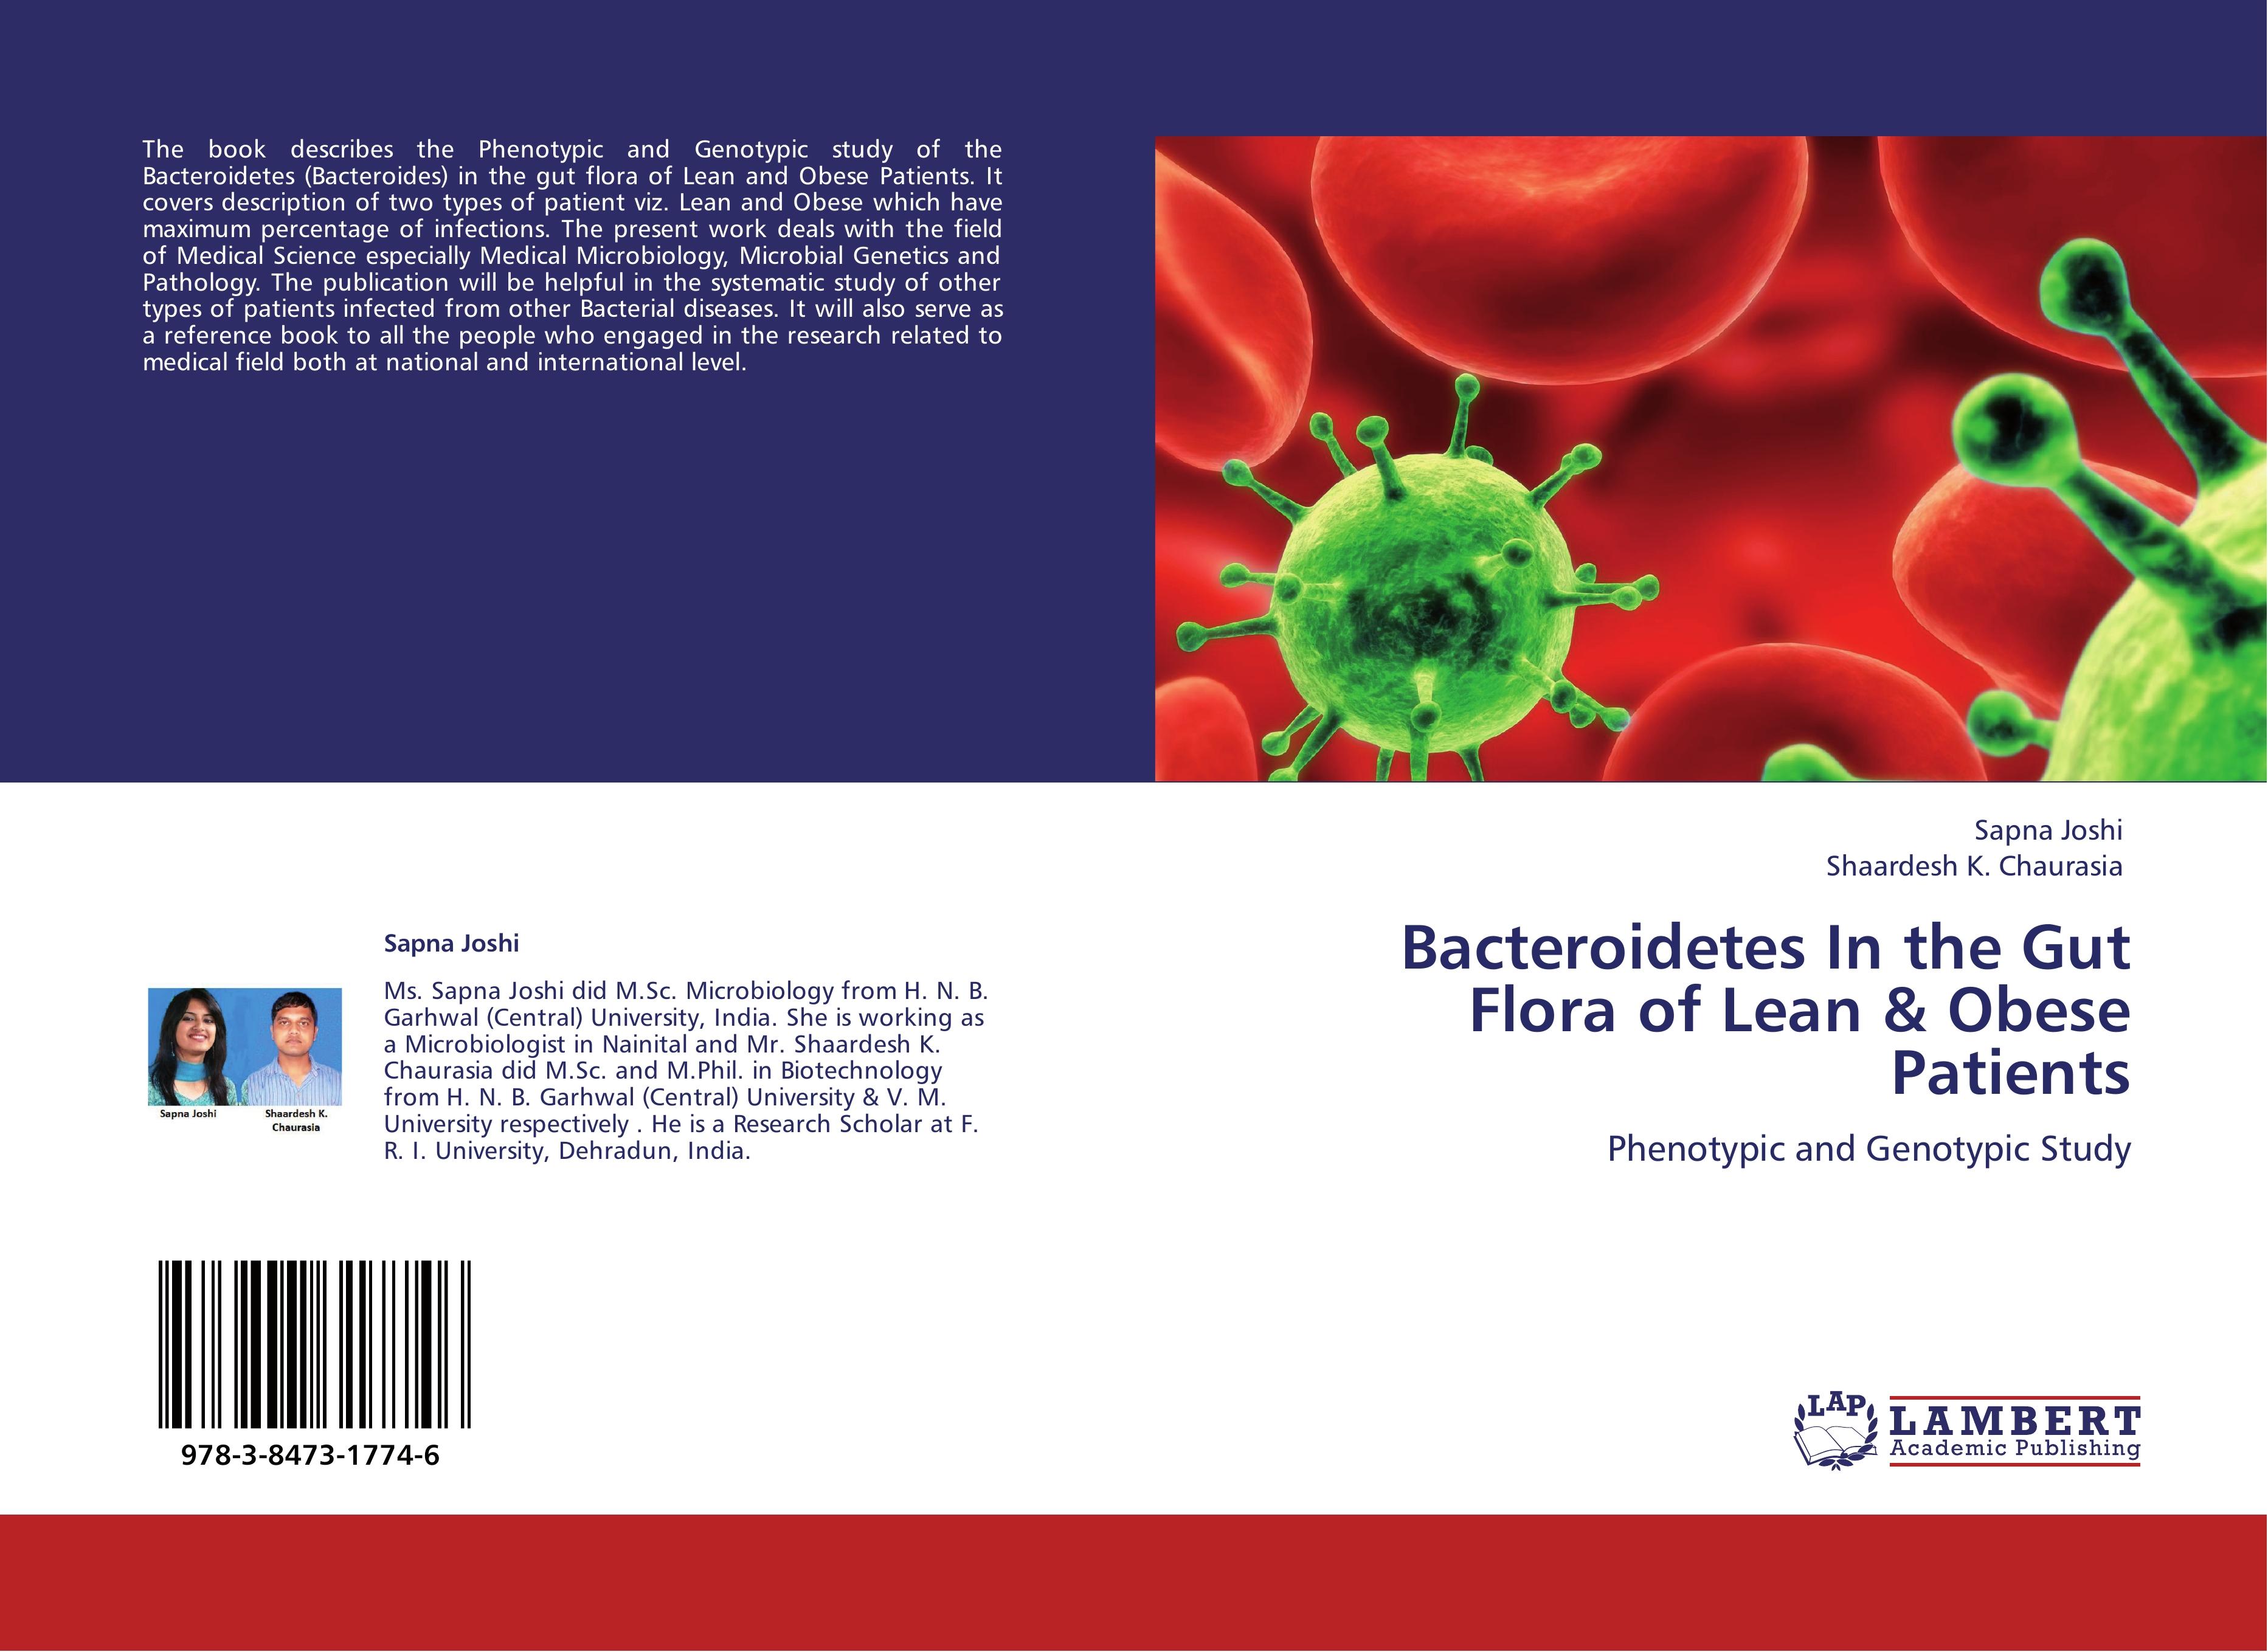 Bacteroidetes In the Gut Flora of Lean & Obese Patients - Sapna Joshi Shaardesh K. Chaurasia